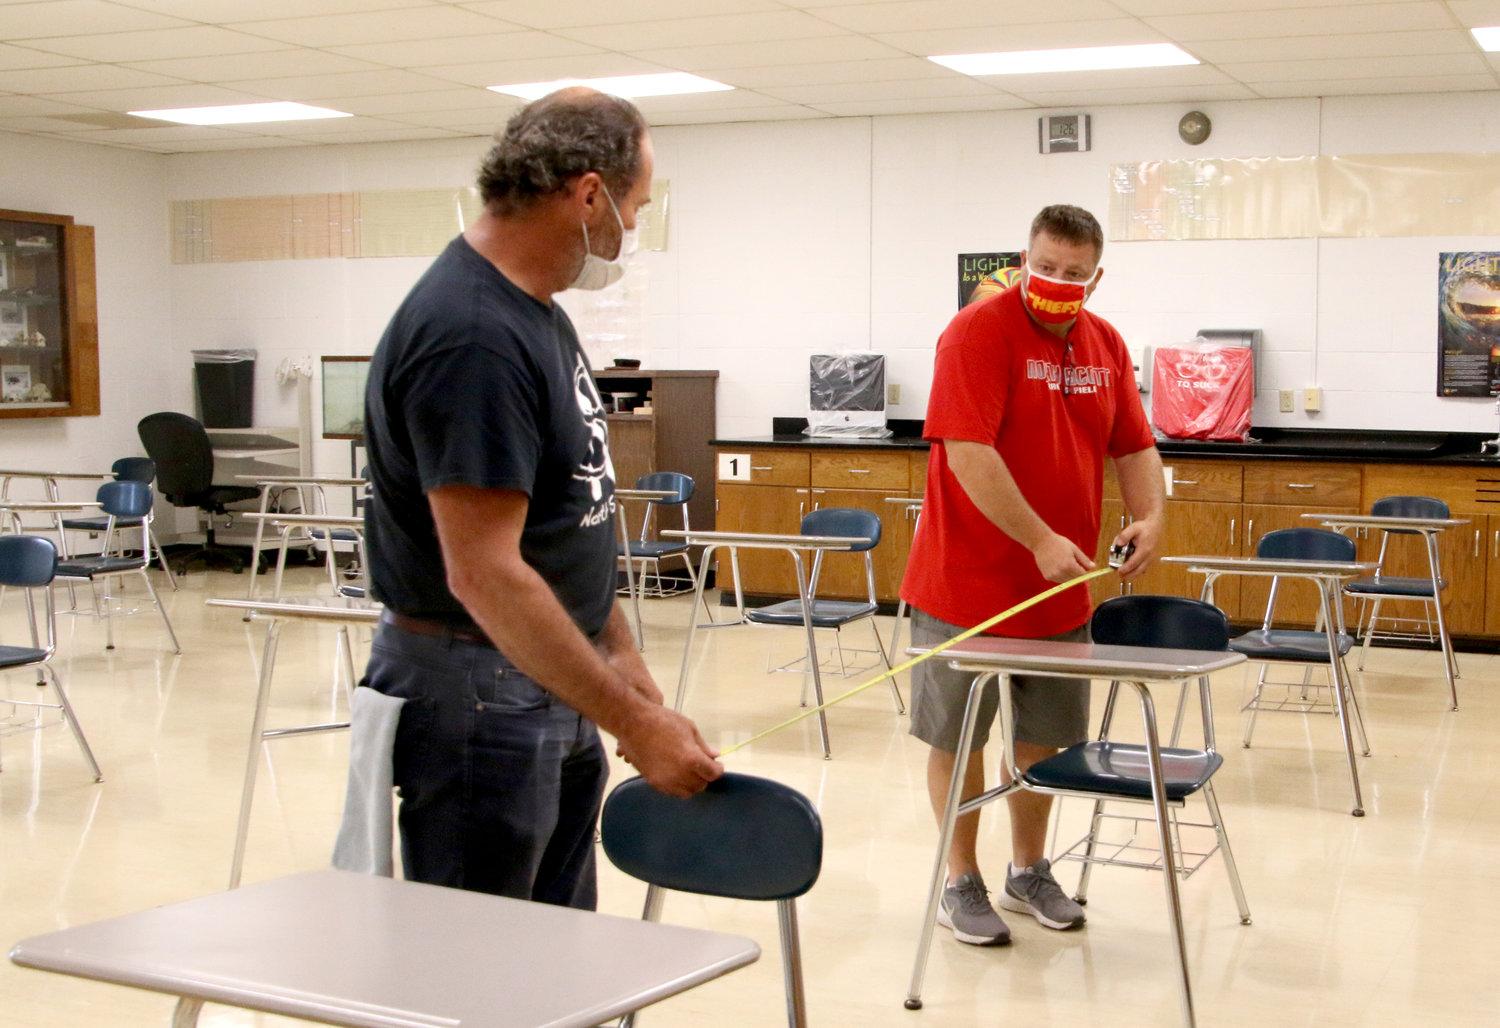 School district custodians Dan House, left, and Nate Noel, measure 6 feet between junior high classroom desks. The staff is removing non-essential tables, cabinets and other furniture to create enough room between desks.